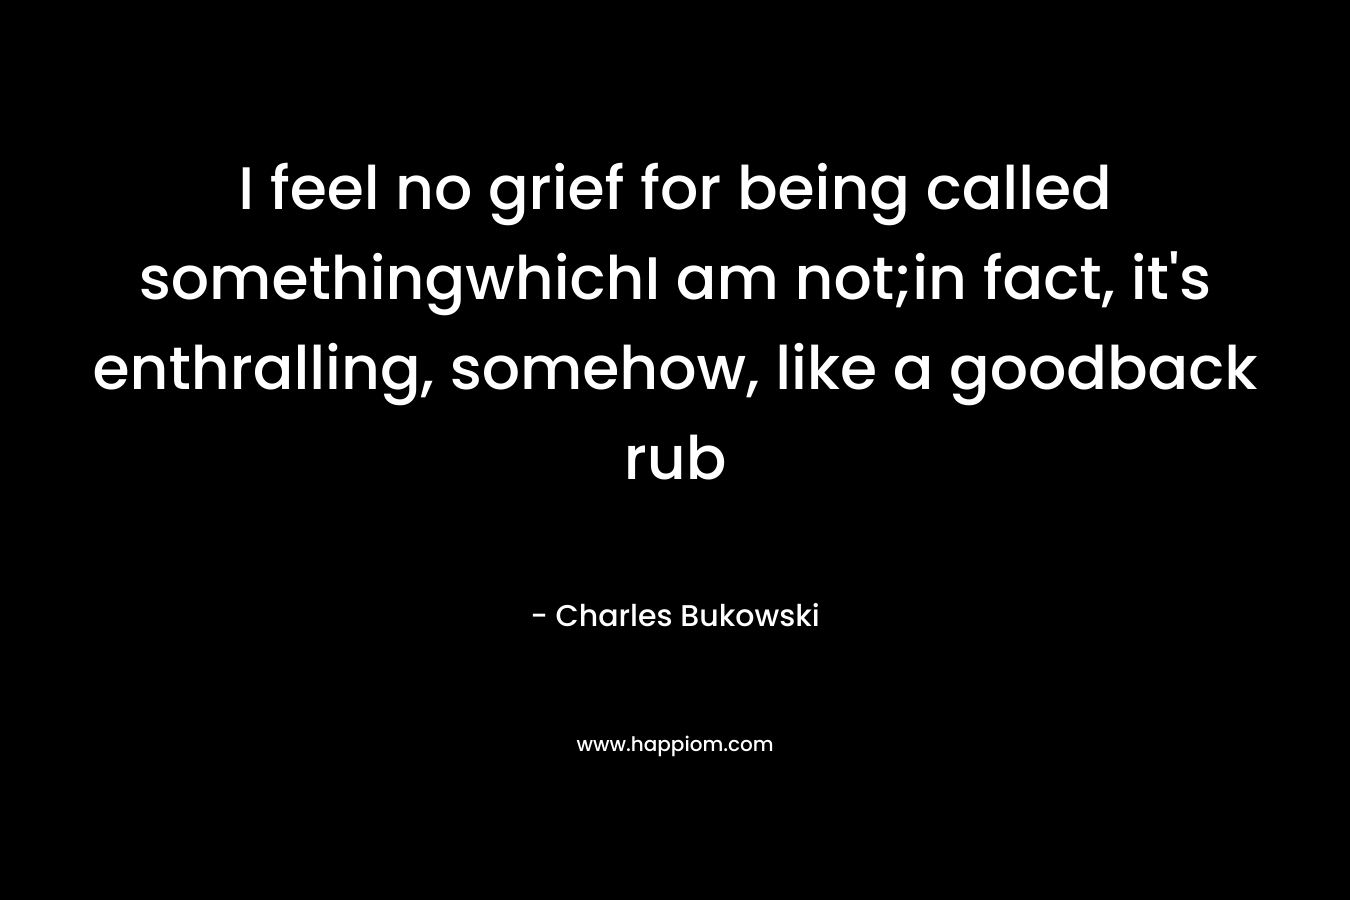 I feel no grief for being called somethingwhichI am not;in fact, it's enthralling, somehow, like a goodback rub